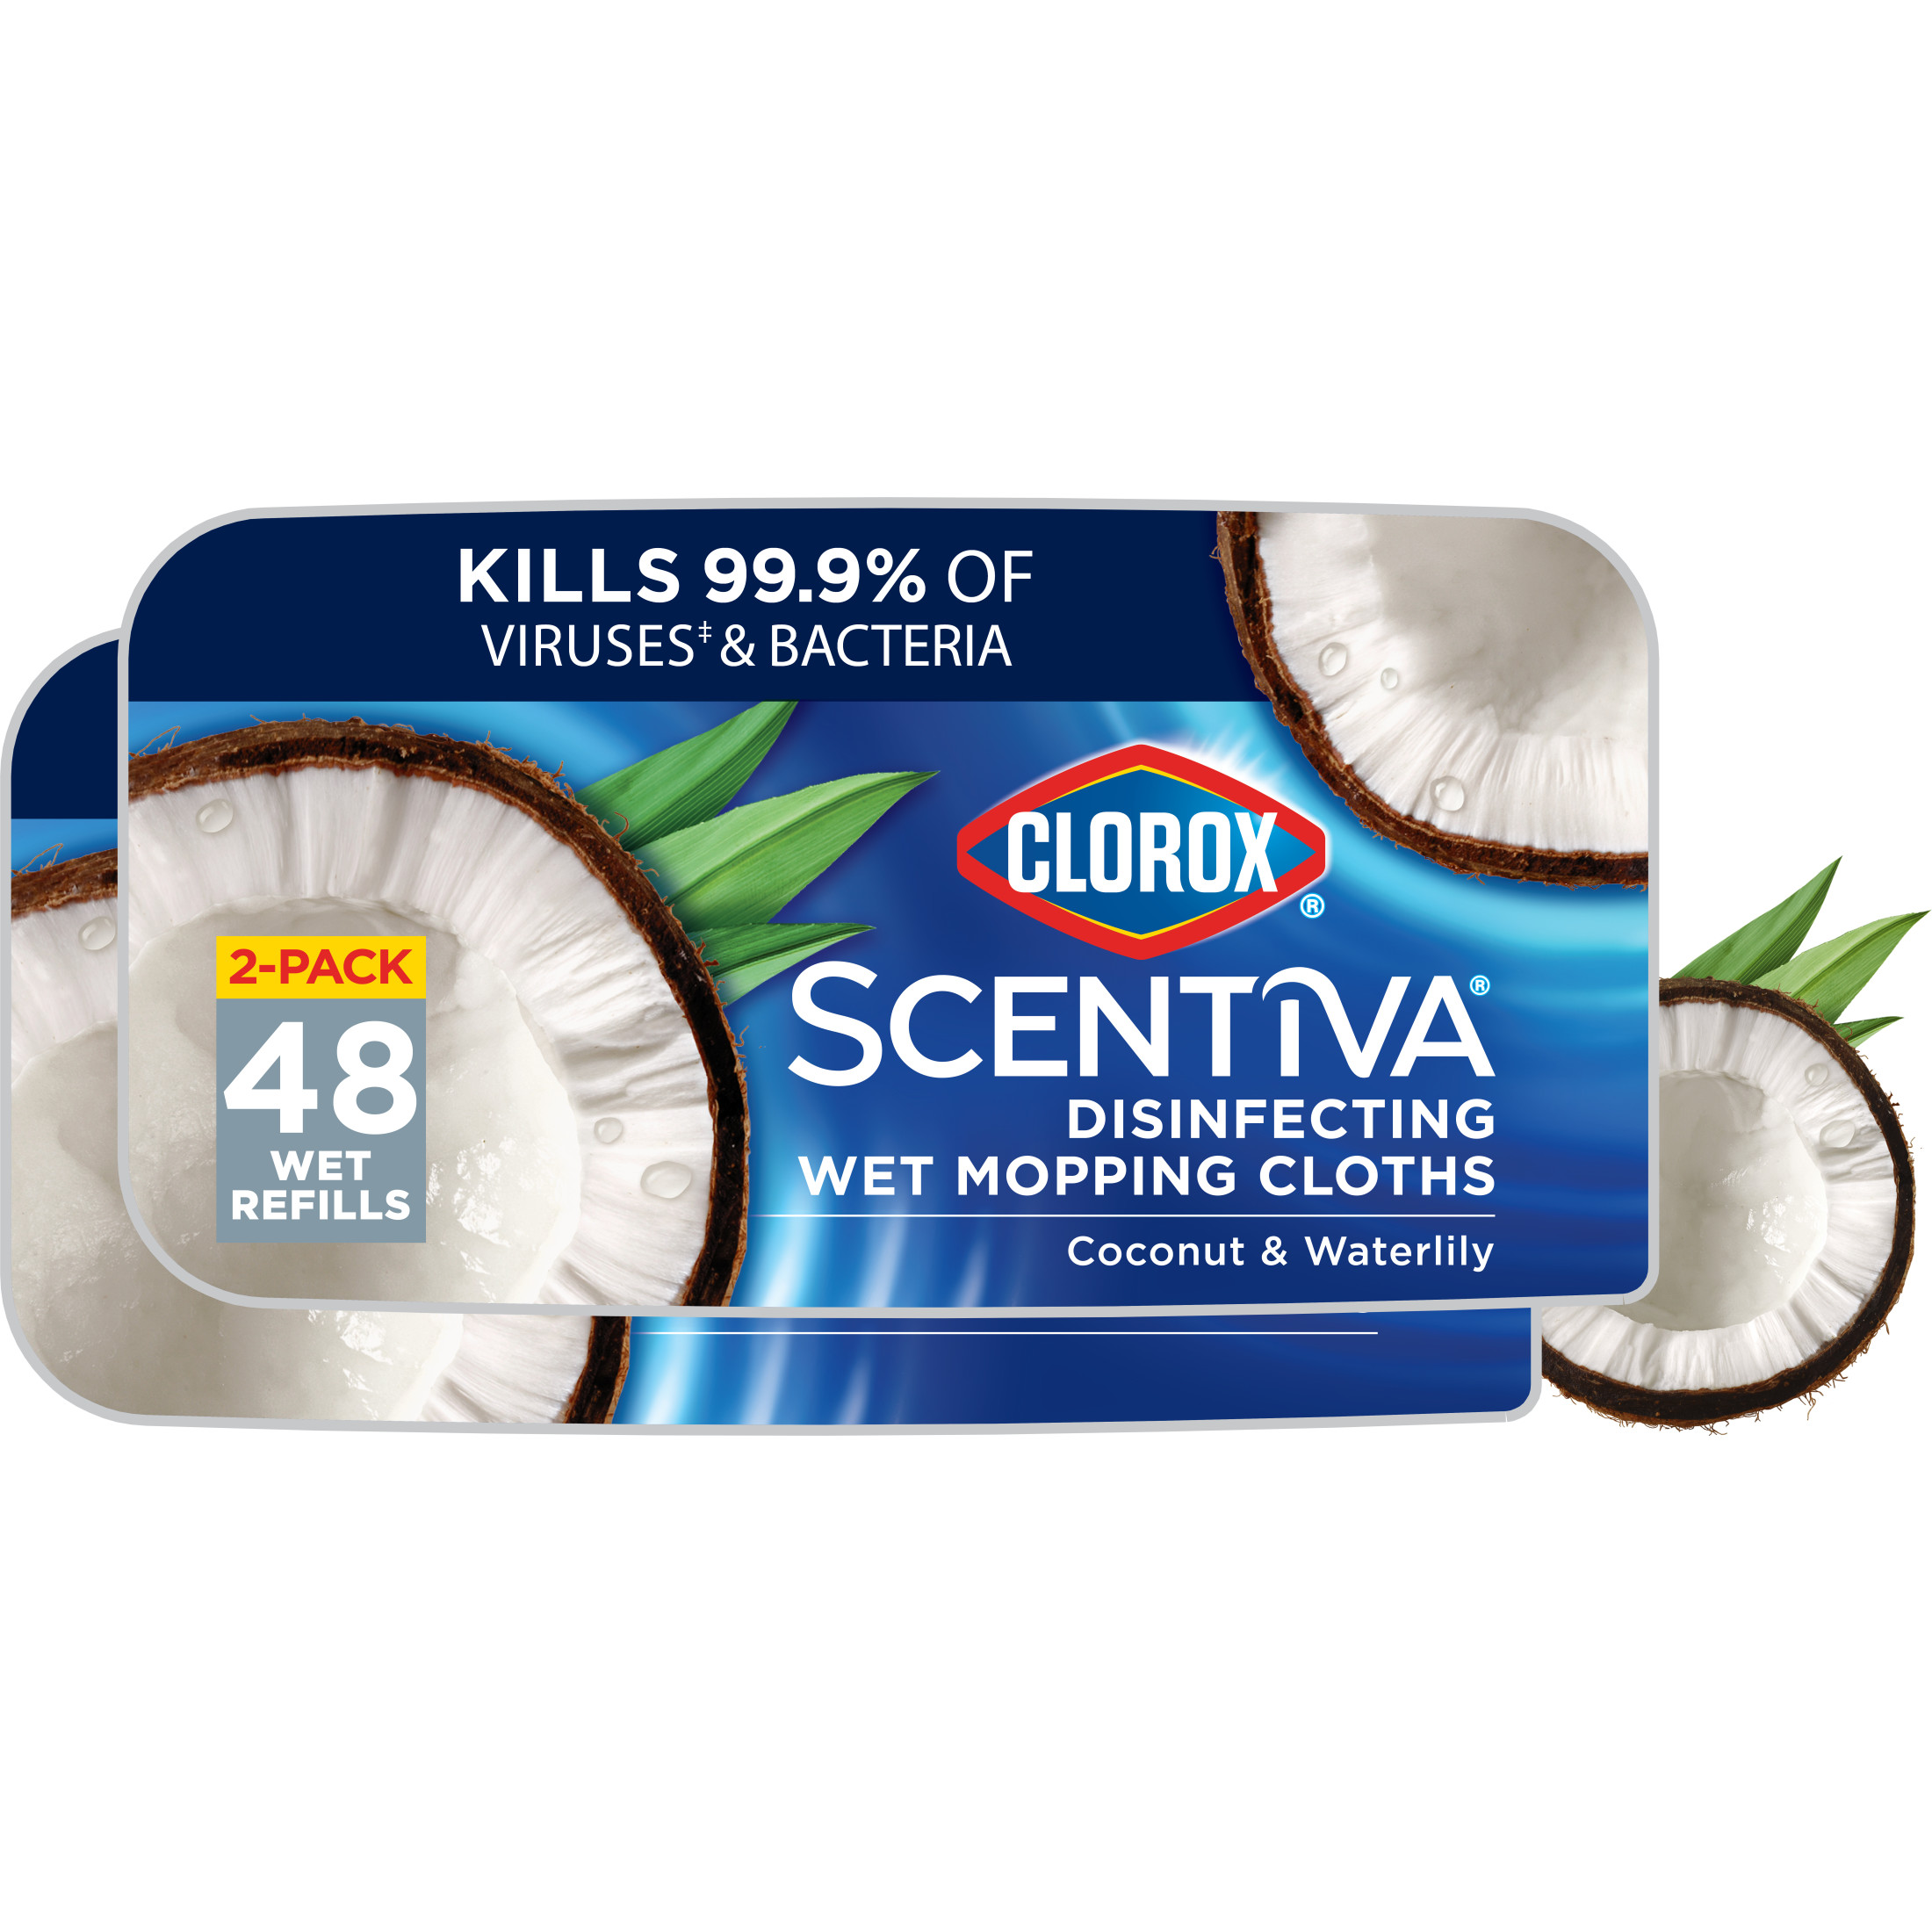 Clorox Scentiva Disinfecting Wet Mop Pads, Pacific Breeze and Coconut, 48 Count - image 1 of 11